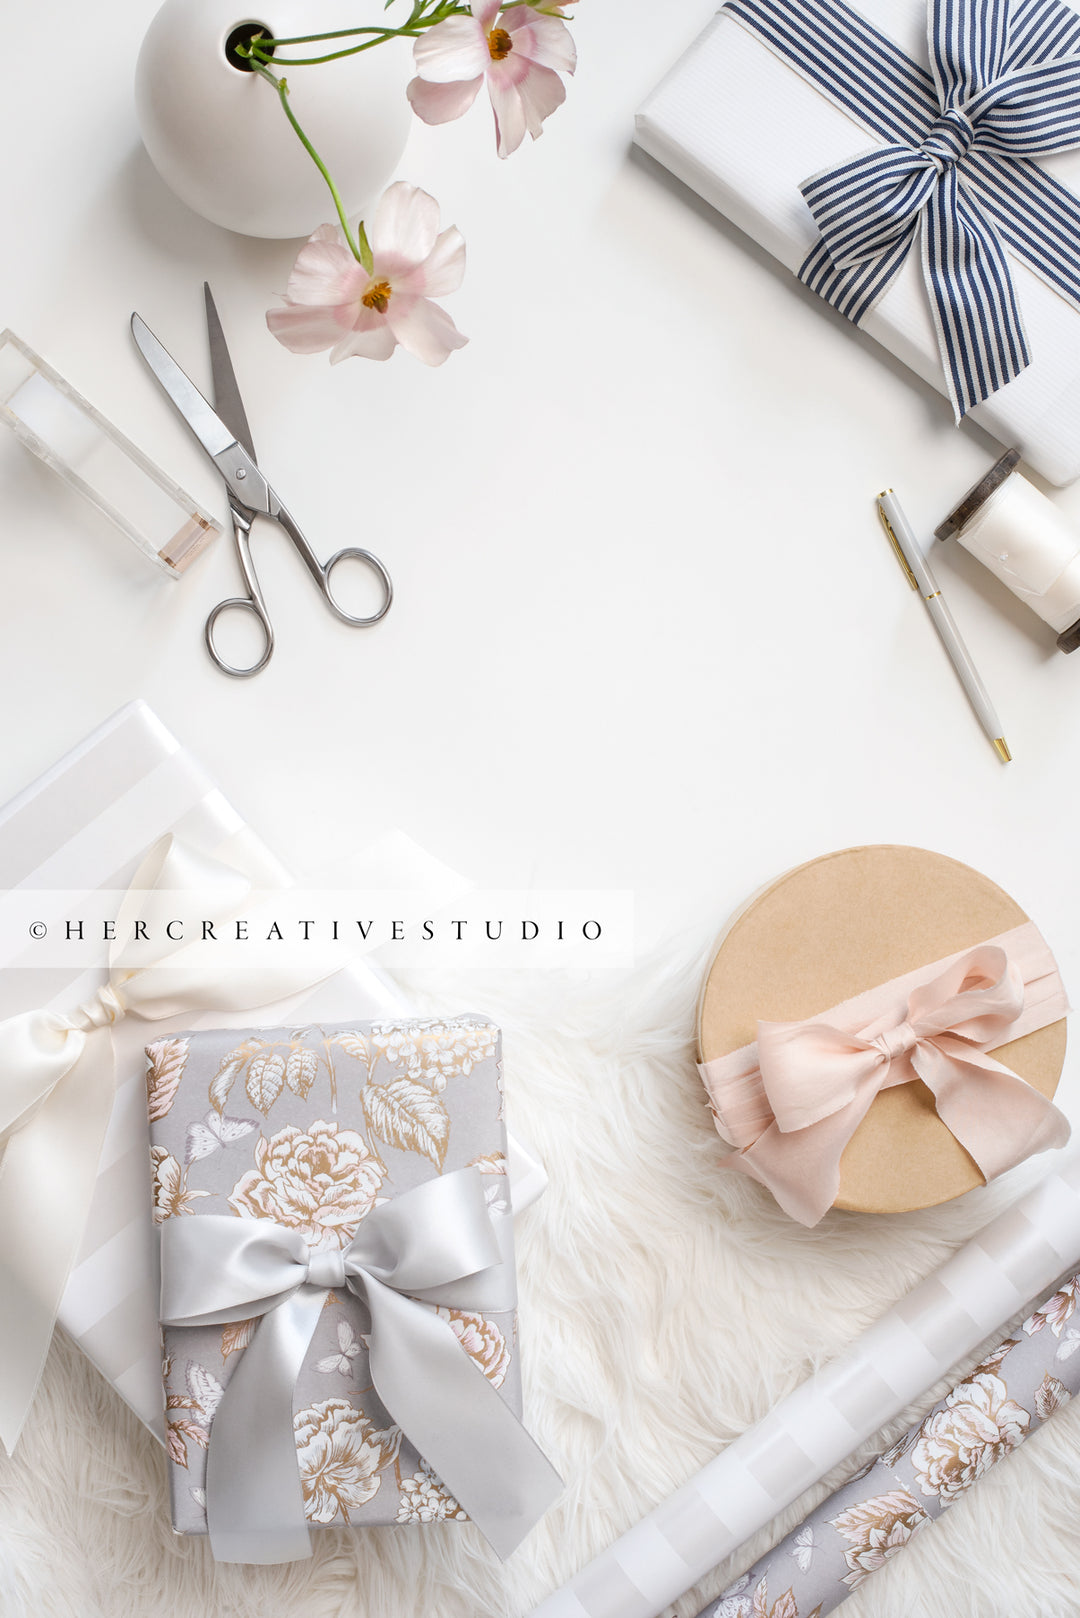 Gifts, Ribbon & Flowers on White Background. Stock Image